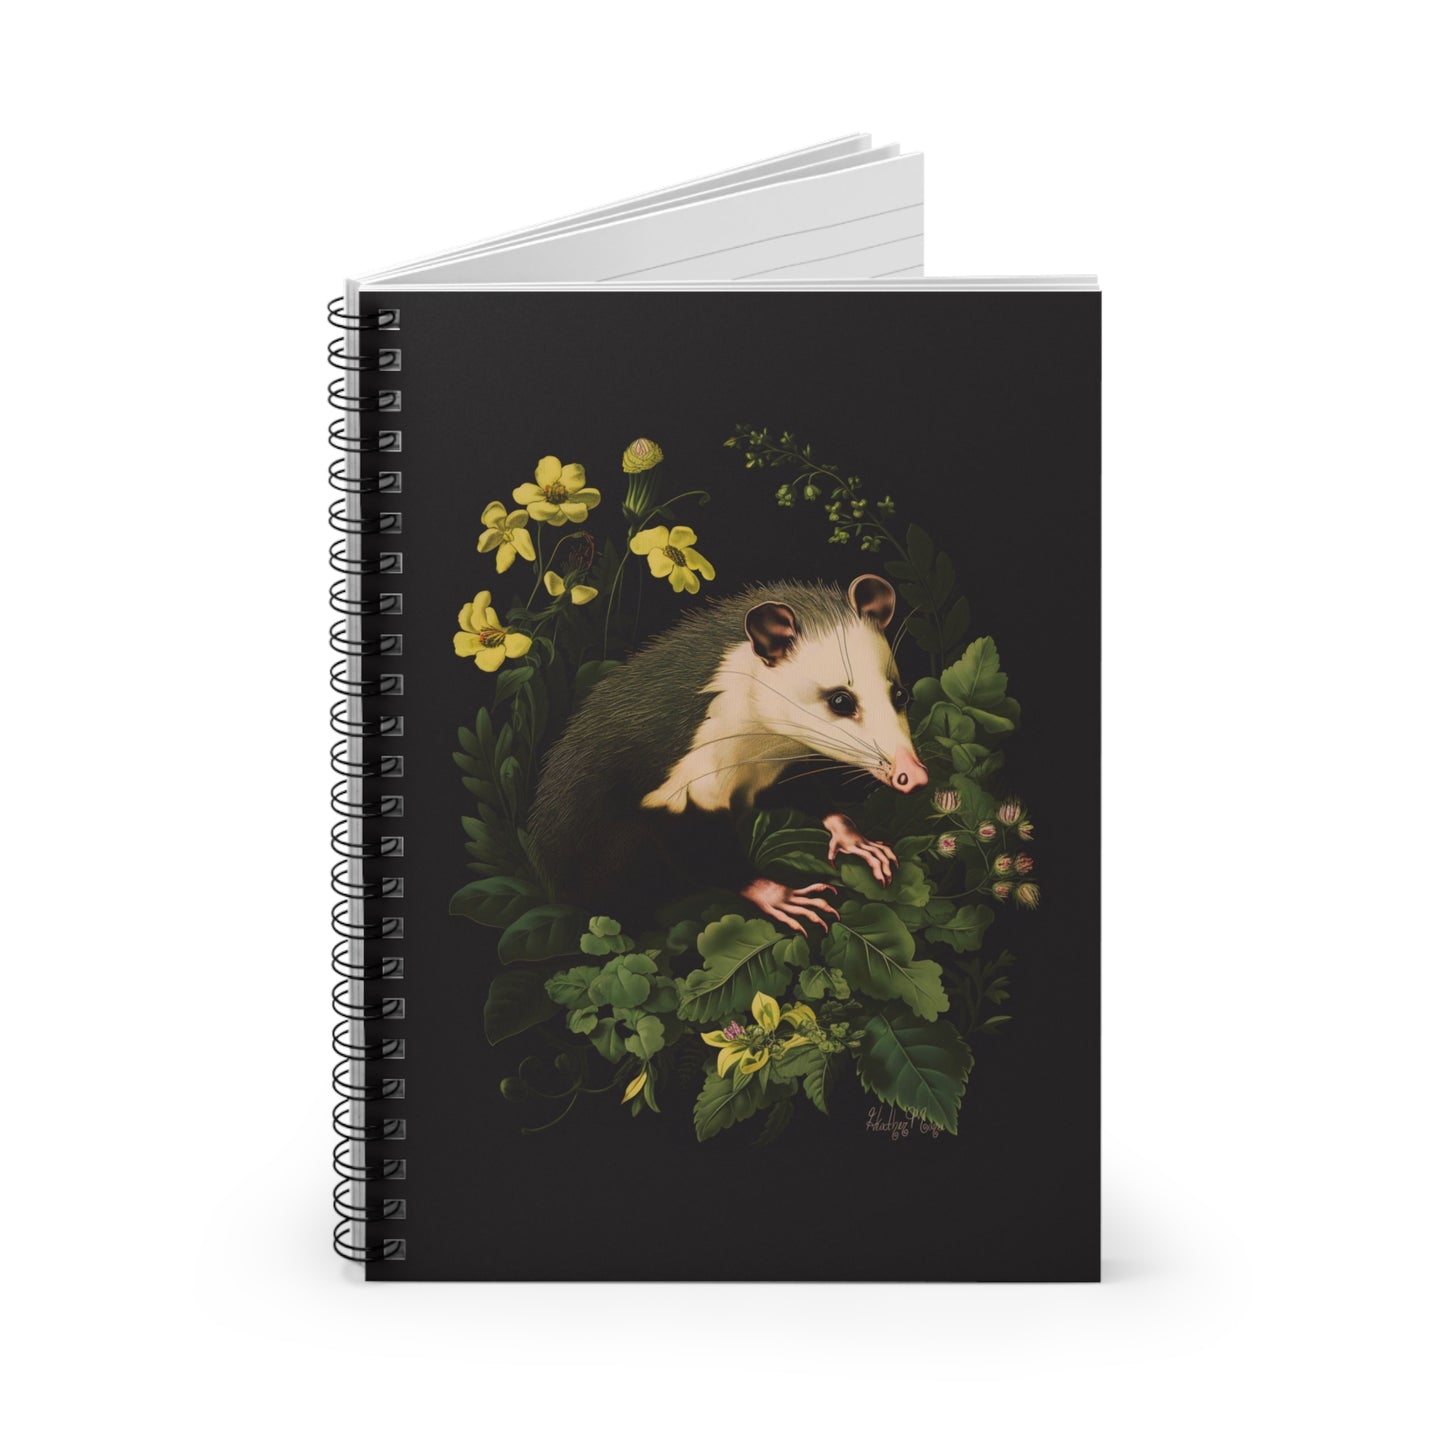 Opossum with Yellow Flowers | Ruled Line Spiral Notebook